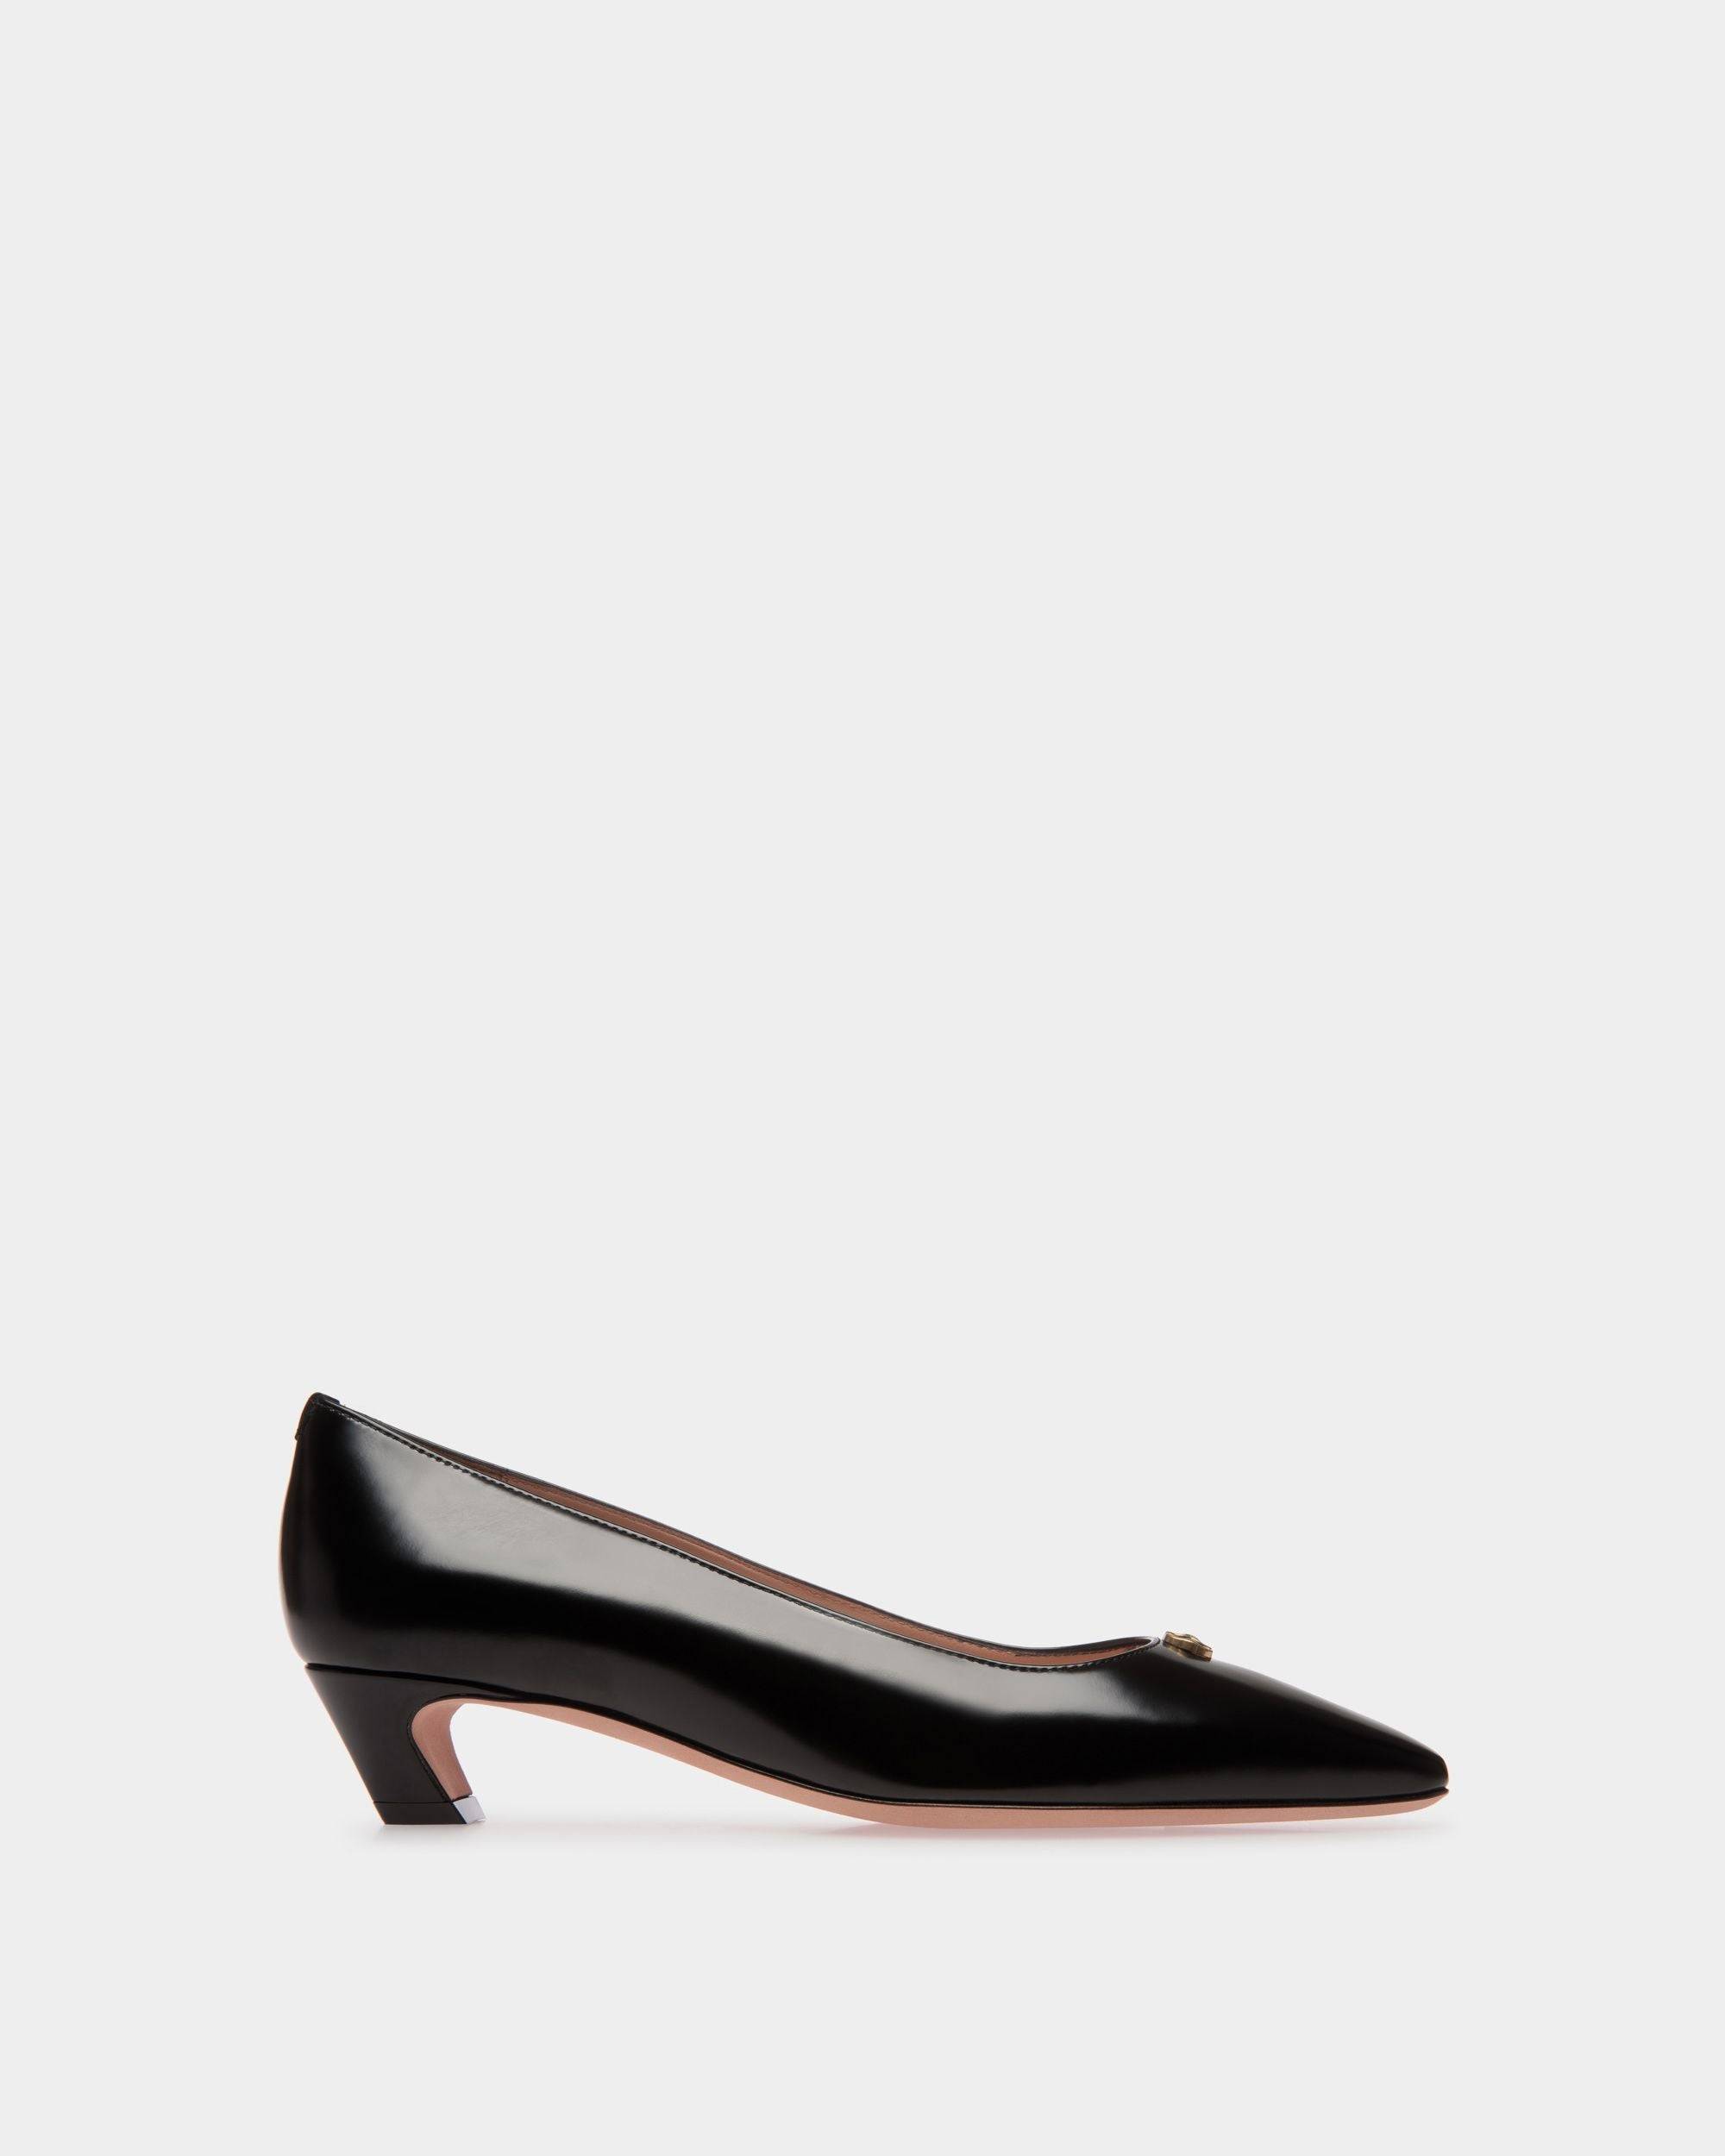 Sylt | Women's Pump in Black Leather | Bally | Still Life Side